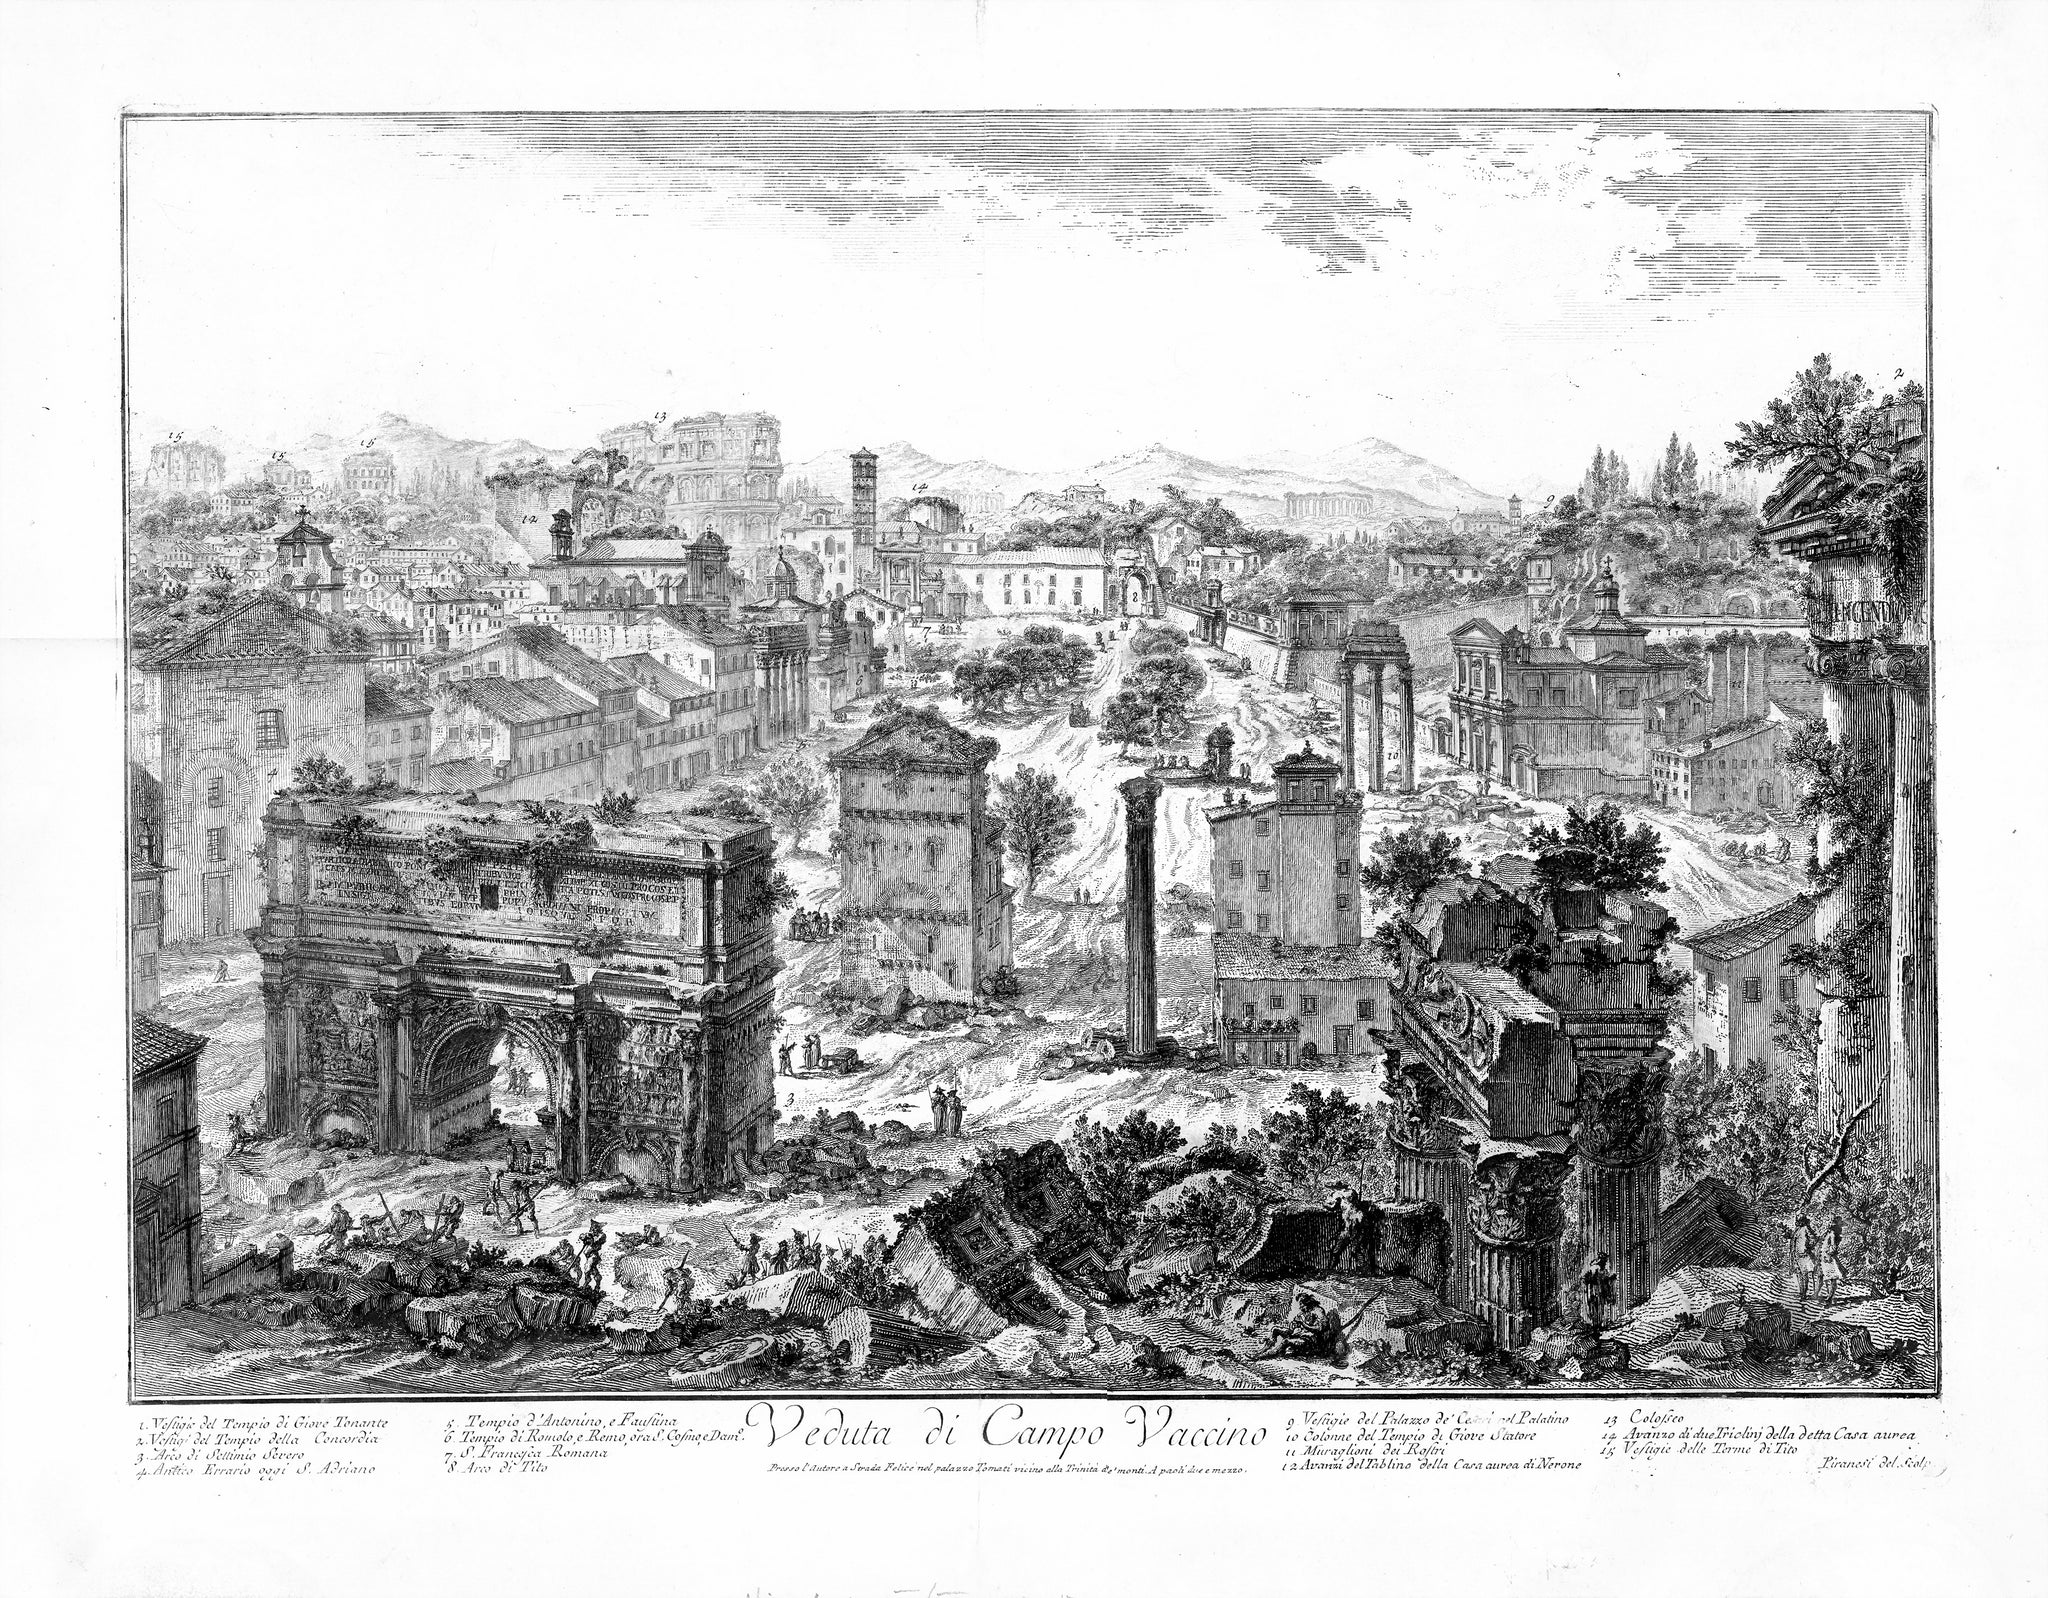 "Veduta di Campo Vaccino" - Foro Romano  Copper etching by Giovanni Battista Piranesi (1720-1778)  Published in "Vedute di Roma"  Hind 40. State III from VI. Rome, 1757  Original antique print   From 17th to the 19th century, before grand style excavations, the suburban area of the Foro Romano, was called Campo Vaccio. It was indeed used as a cow pasture and for animal market. That is why Giovanni Battista Piranesi, one of the greatest  Roman architects and artists, gave this title to his impressive etching